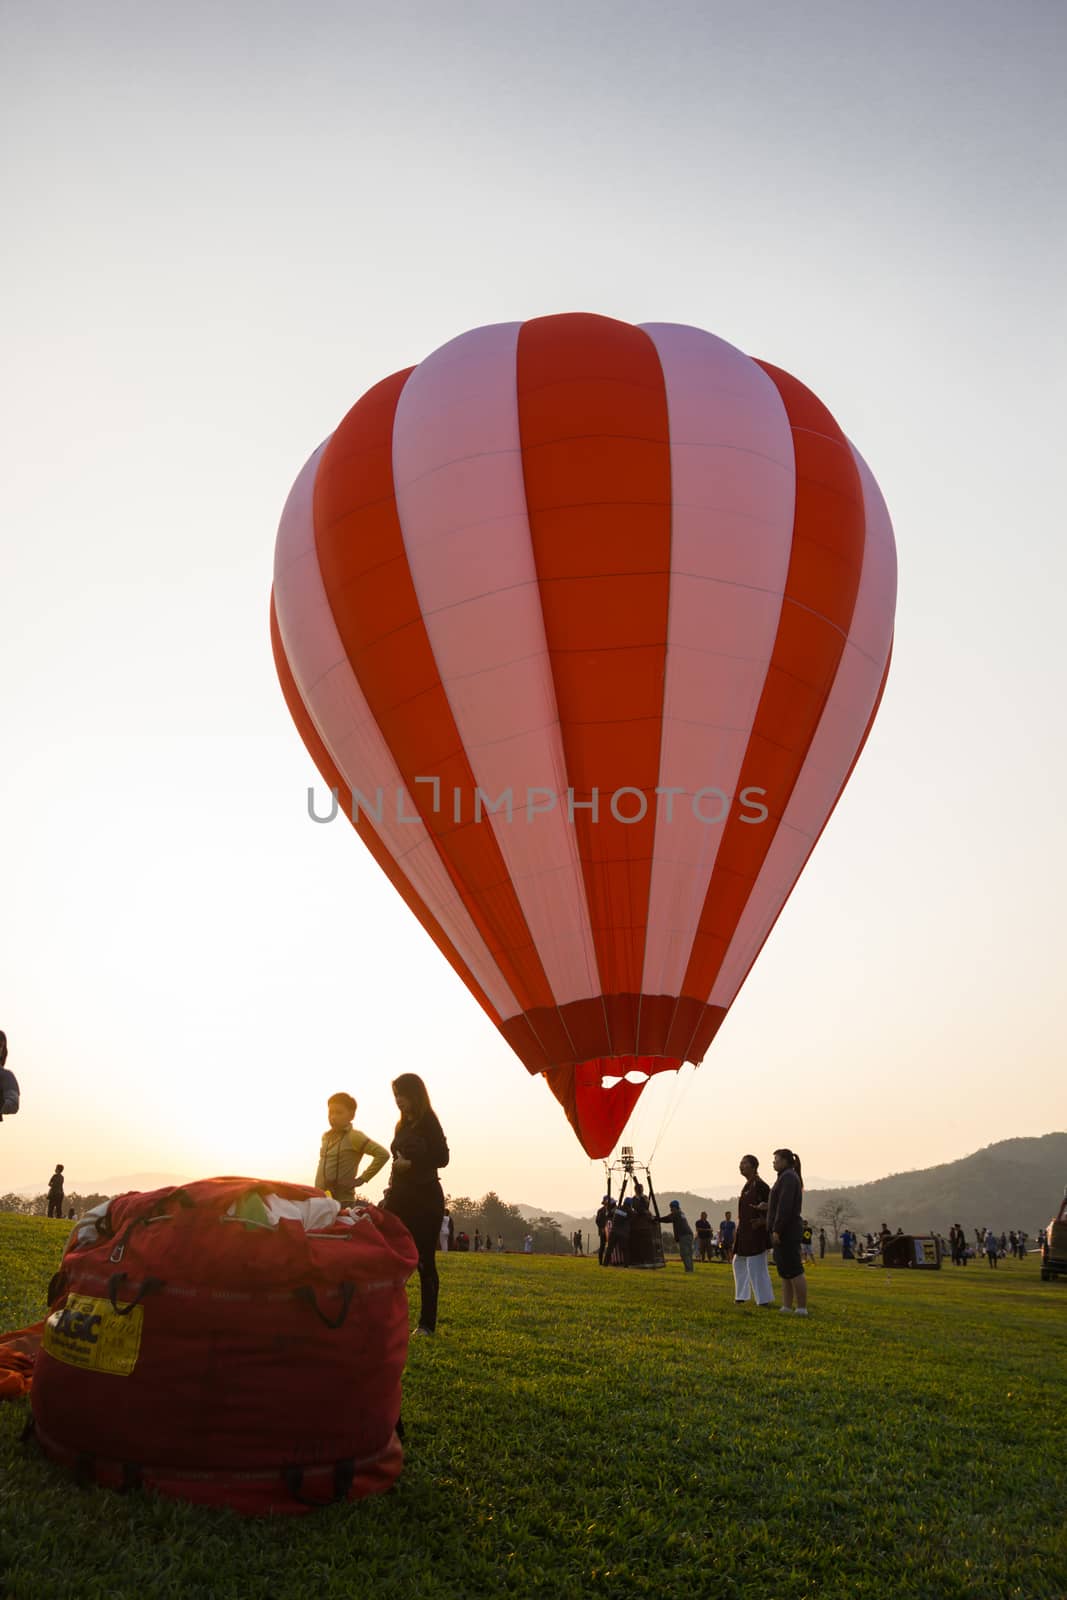 CHIANGRAI, THAILAND - FEBRUARY 15, 2017 : Hot air Balloons ready to rise into the sky in the sunset at SINGHA PARK CHIANGRAI BALLOON FIESTA 2017, Chiangrai province, Thailand